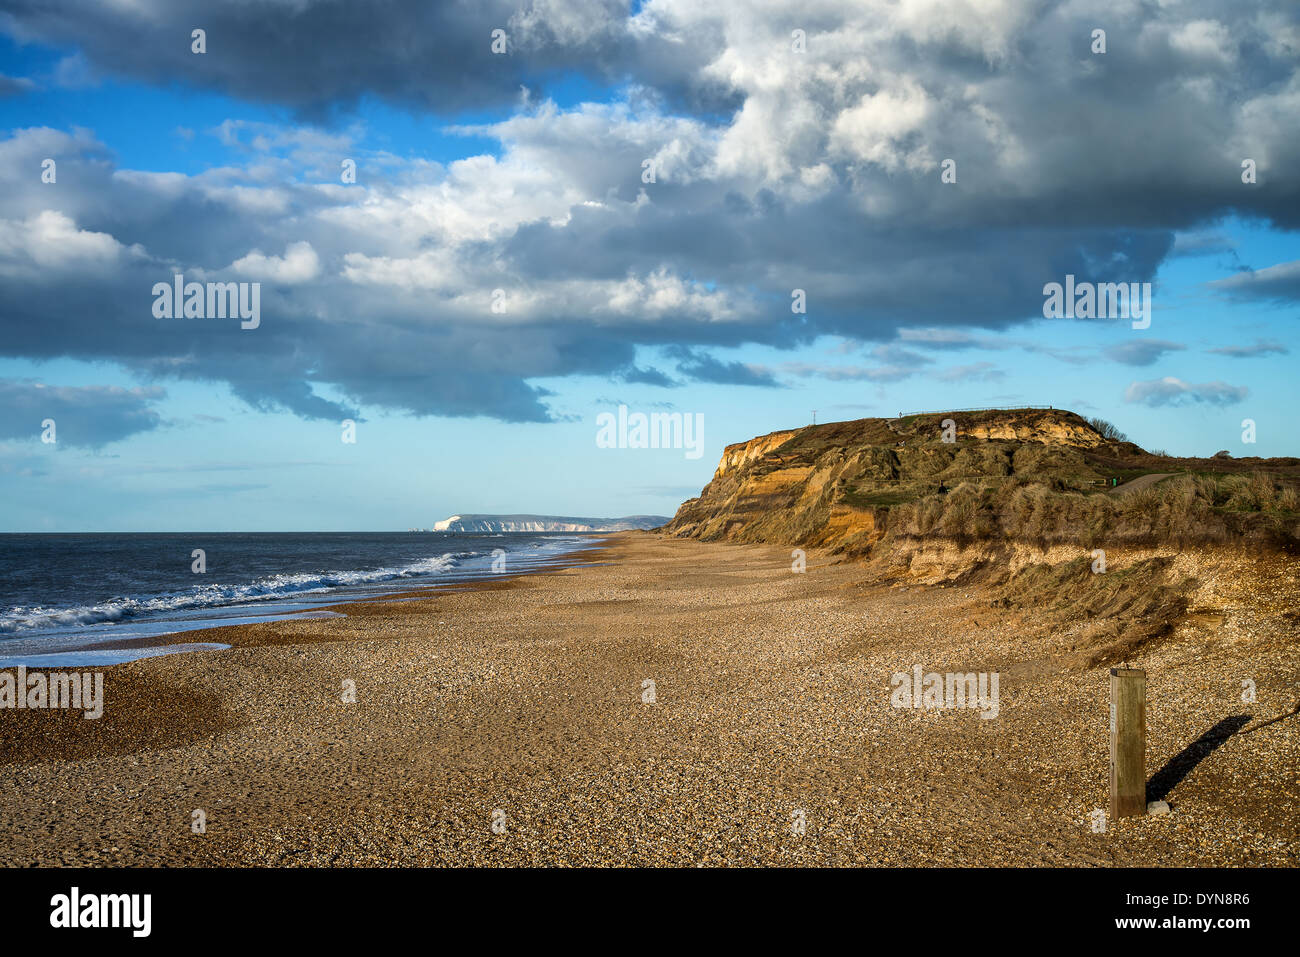 Landscape vibrant sunset over beach and cliffs Stock Photo